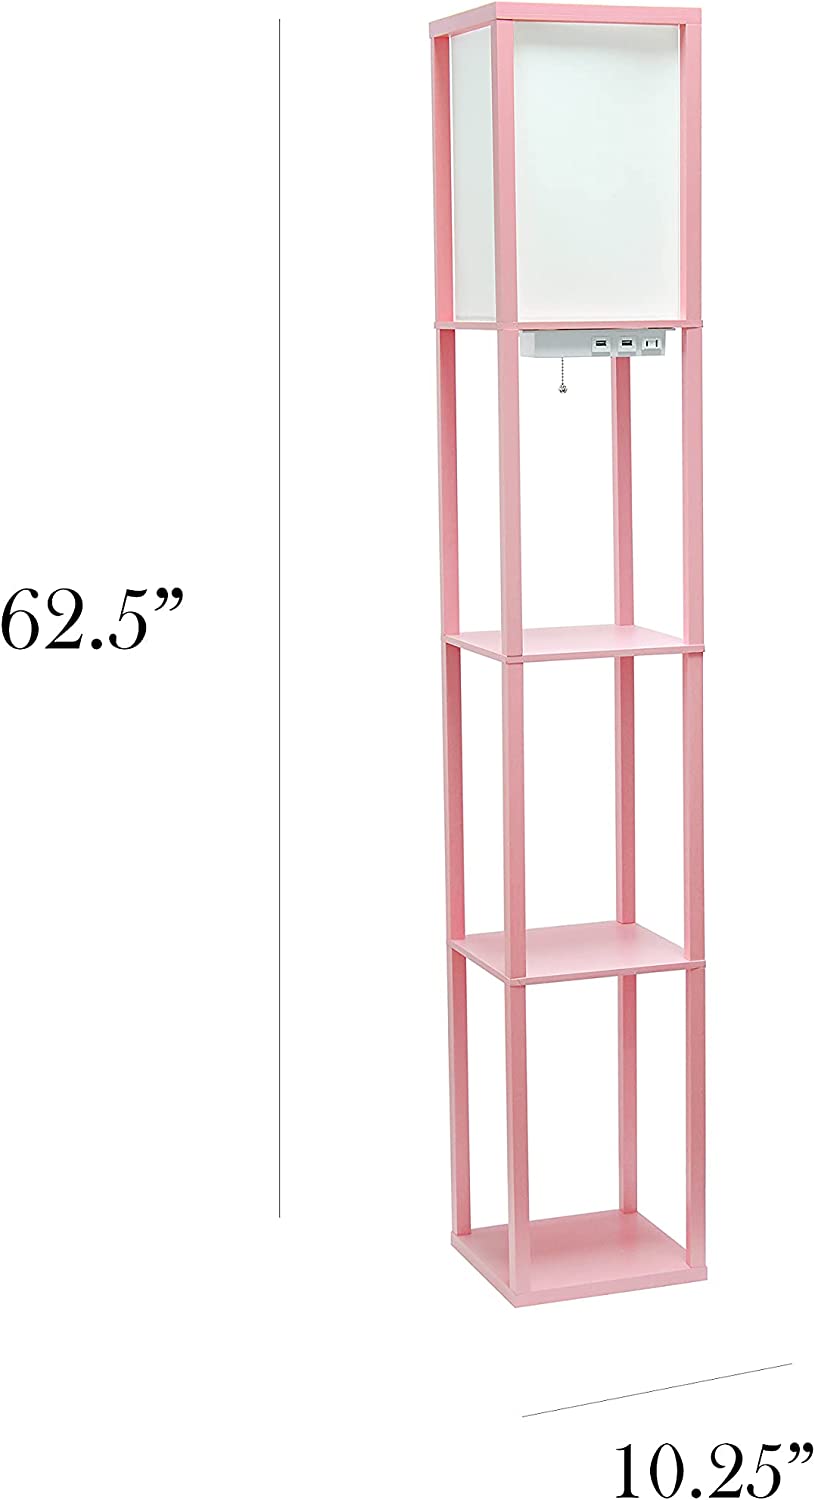 Simple Designs LF1037-LPK Organizer Storage Shelf with 2 Ports, 1 Charging Outlet and Linen Shade USB Etagere Floor Lamp, Light Pink